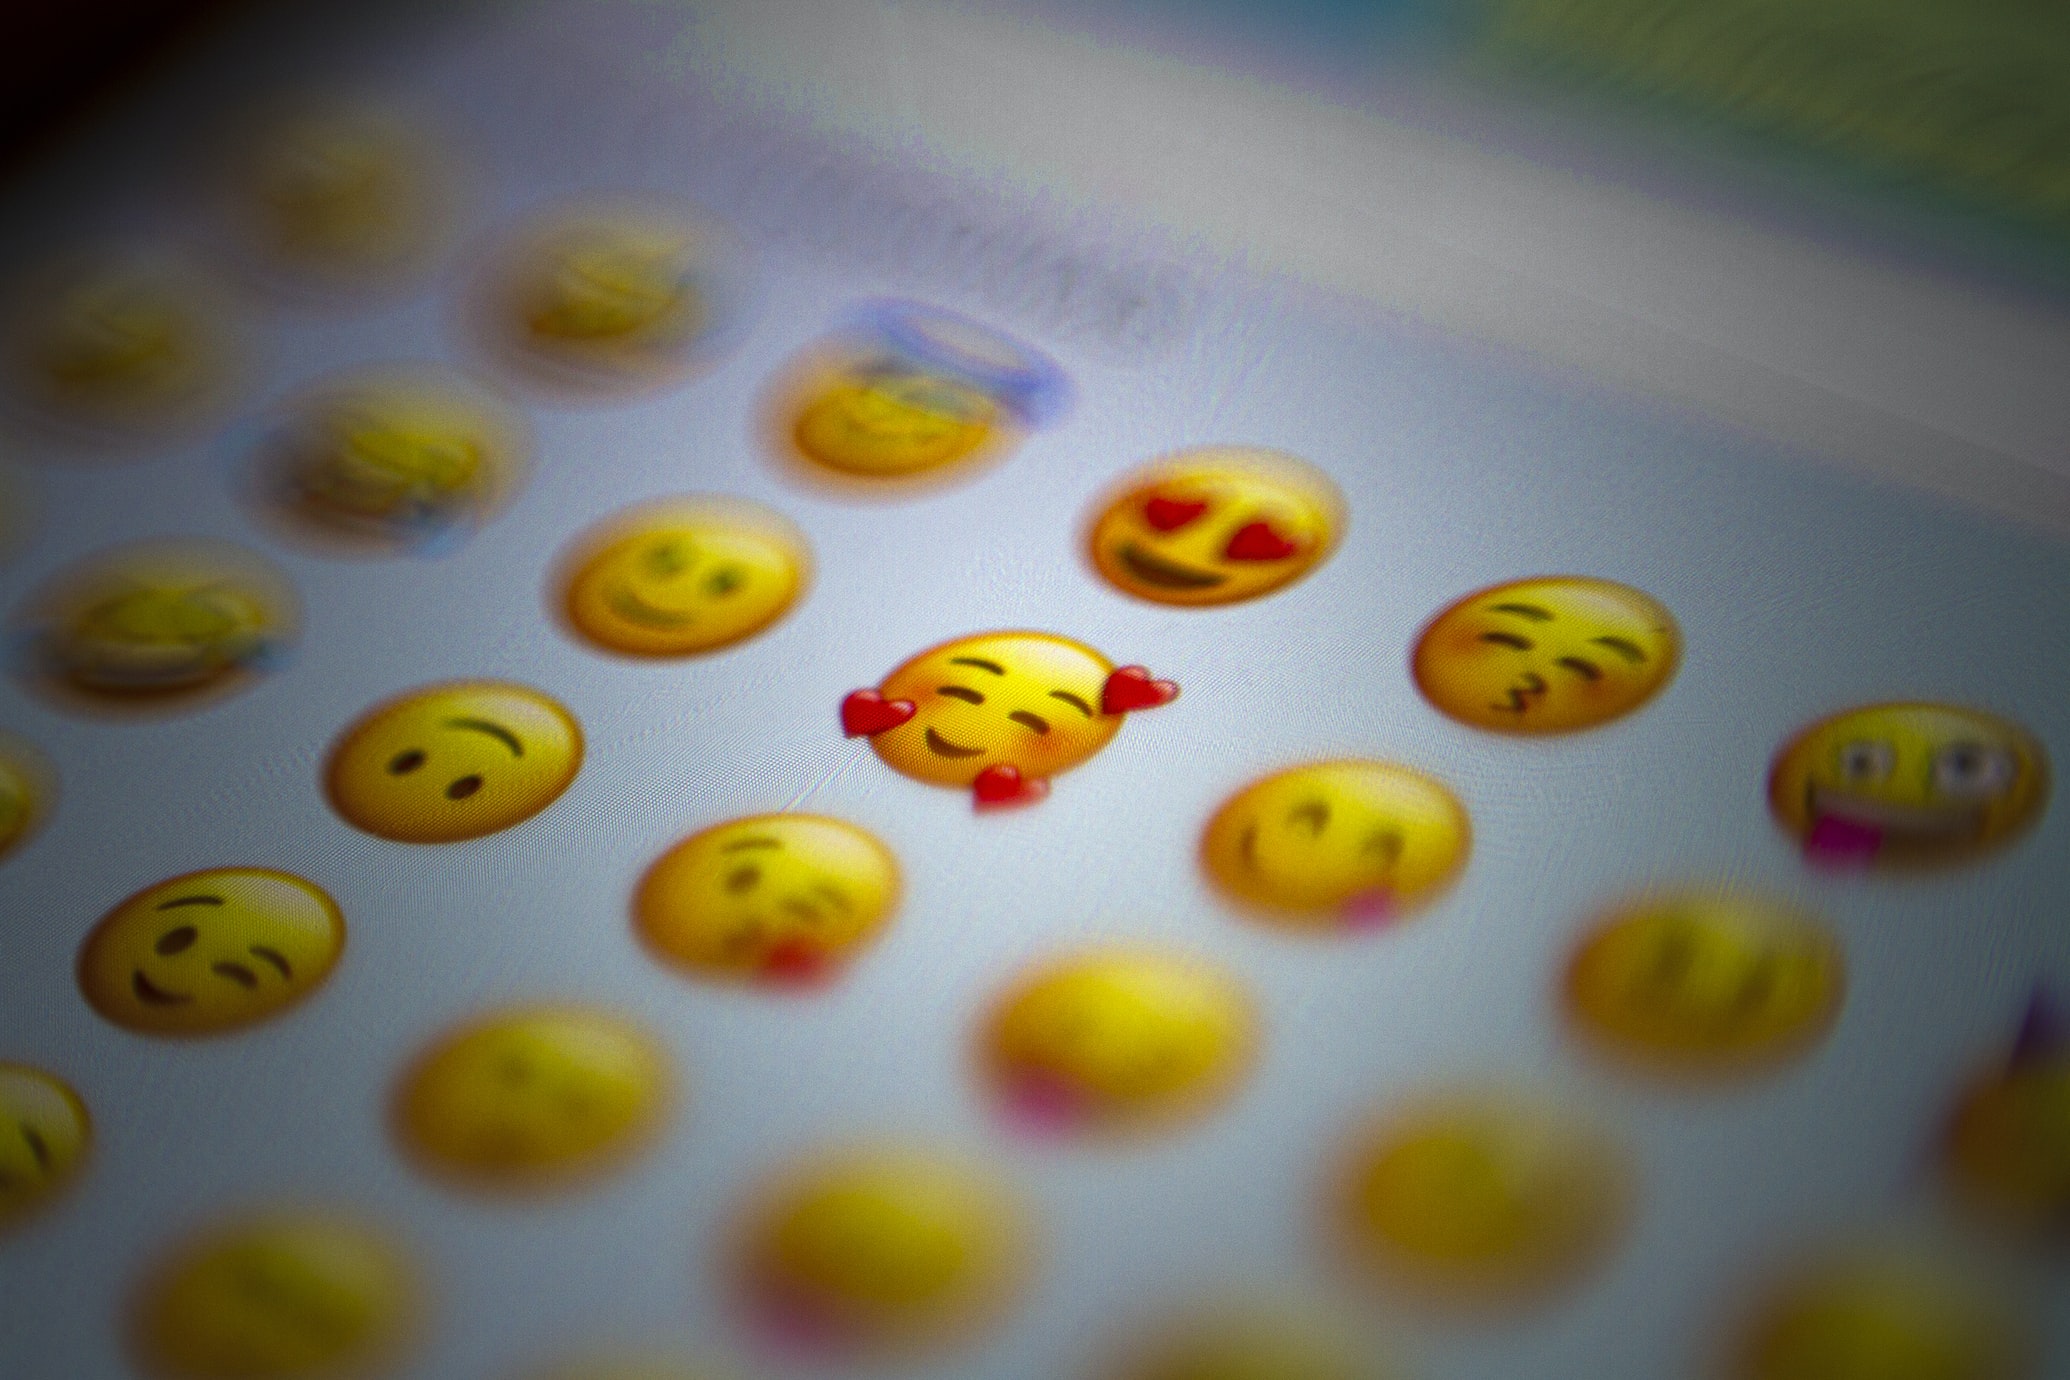 Symbols, icons and emojis are not only a useful tool, but essential in UX and UI design